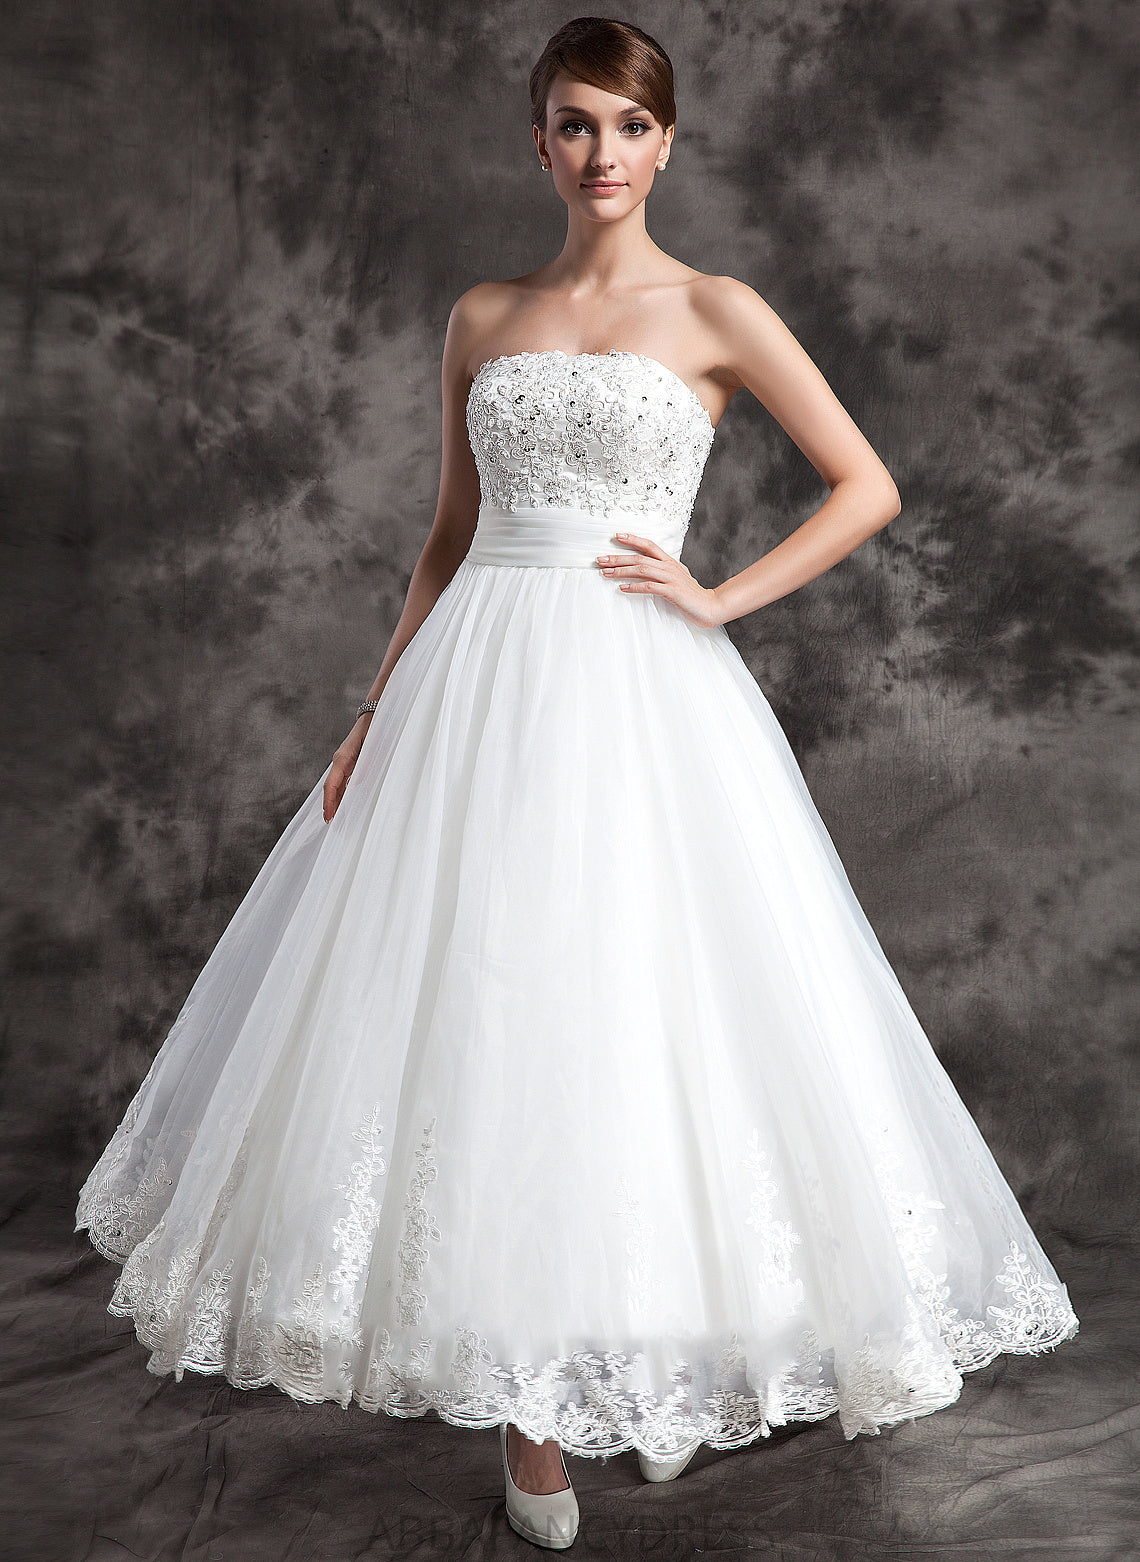 Wedding Beading With Ball-Gown/Princess Strapless Dress Larissa Ankle-Length Wedding Dresses Satin Organza Lace